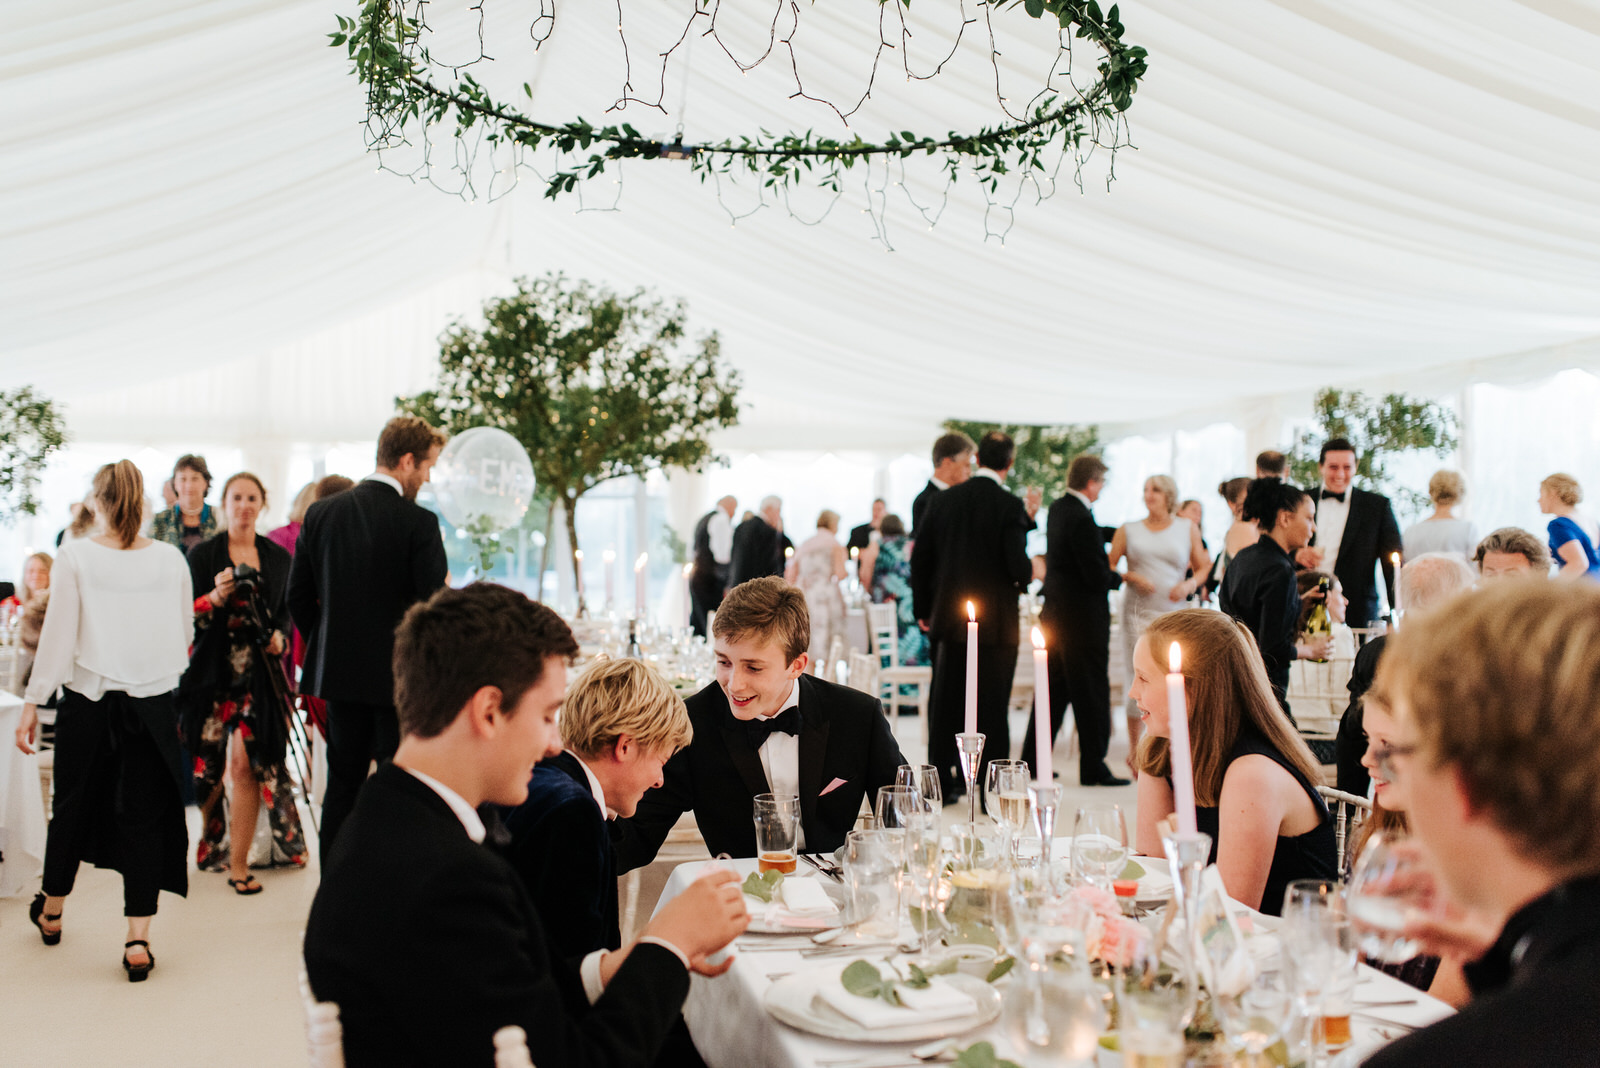 Guests make their way to their tables inside Garden Marquee